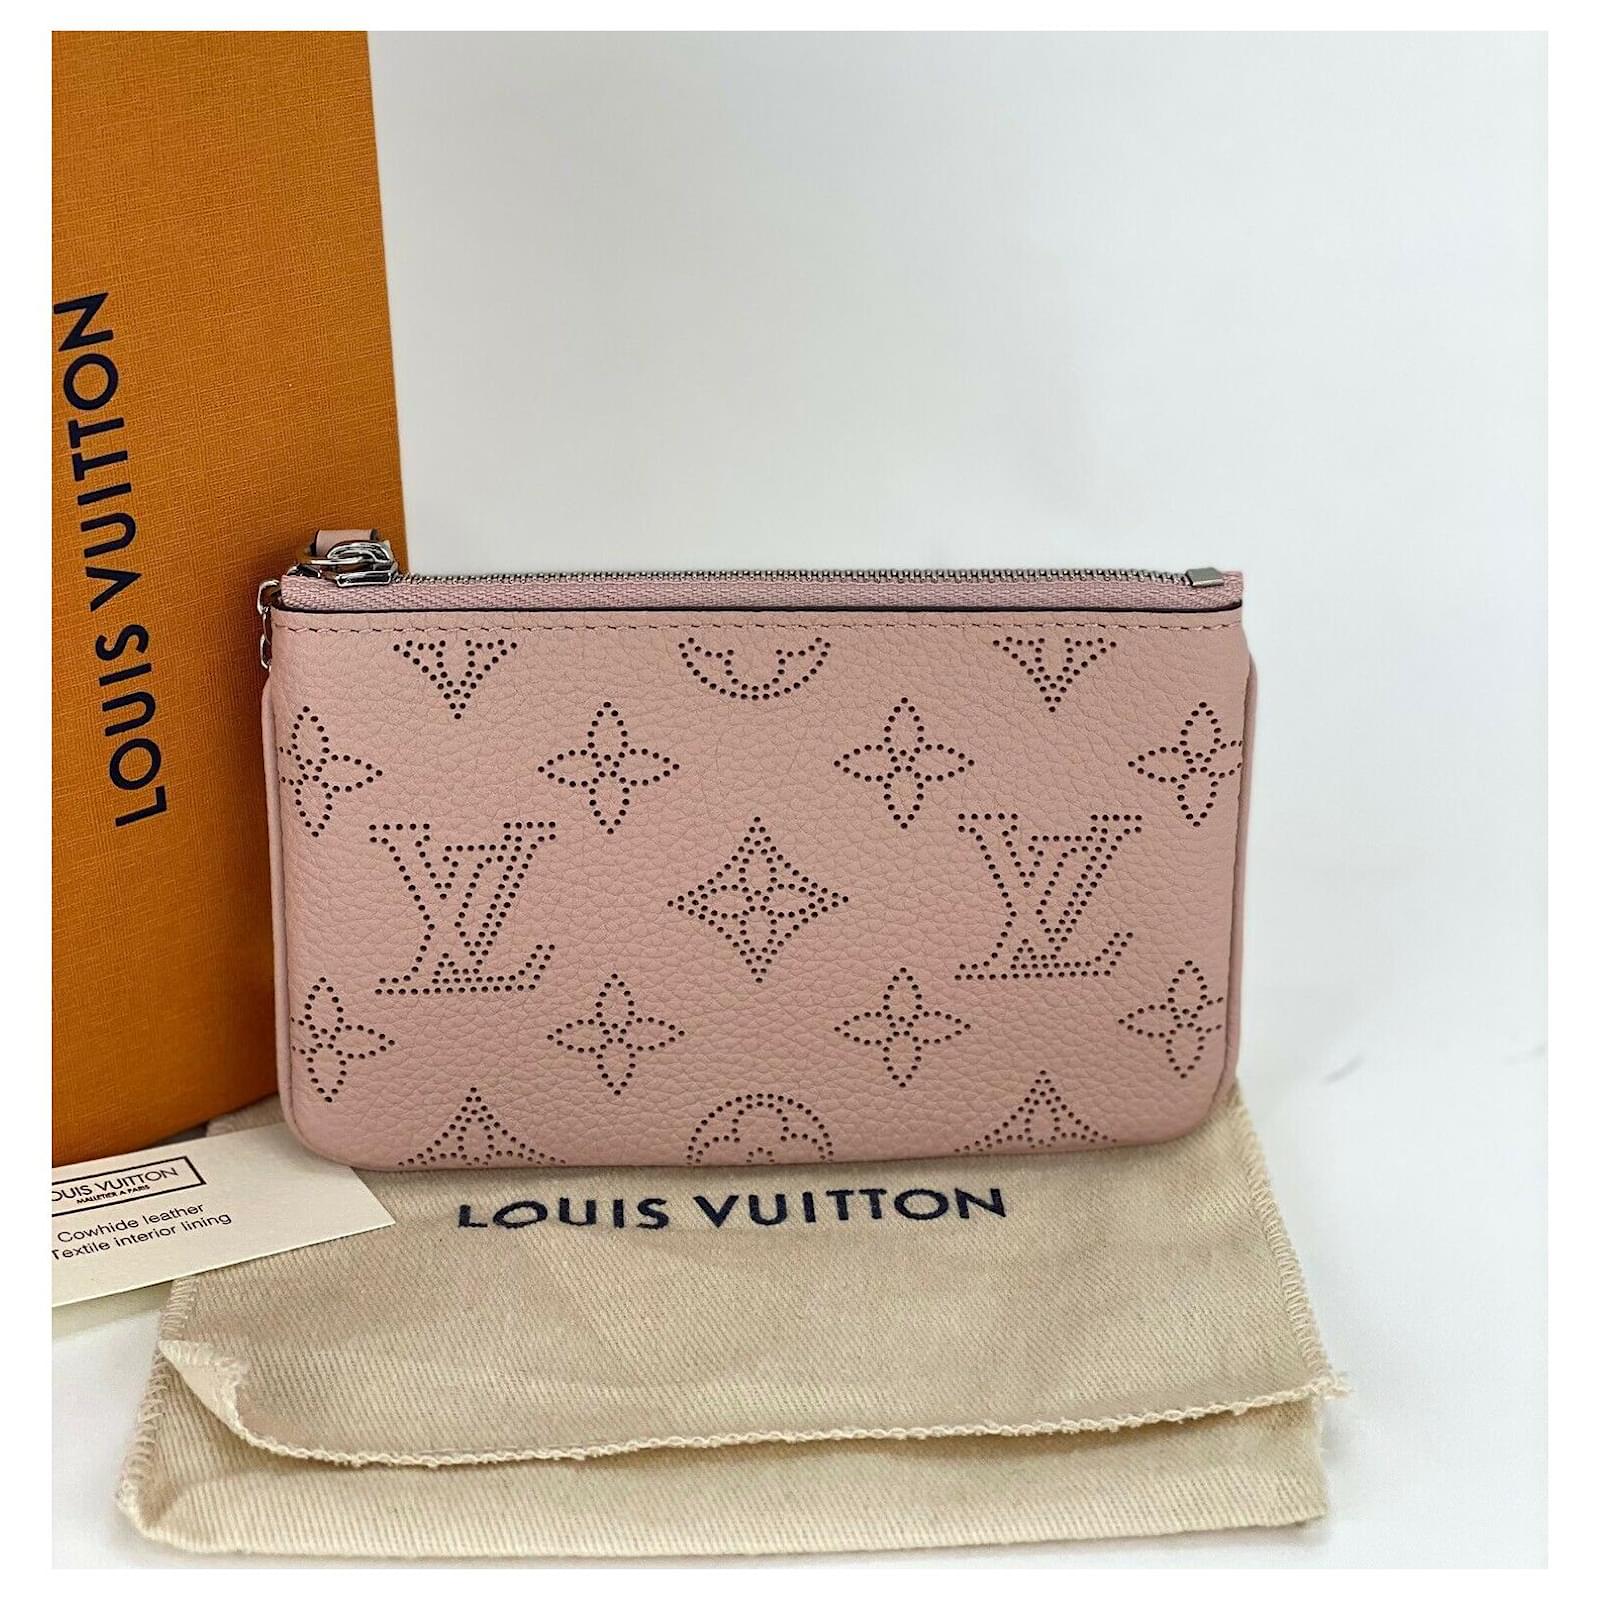 Louis Vuitton Key Pouch Mahina Leather Pink 888471